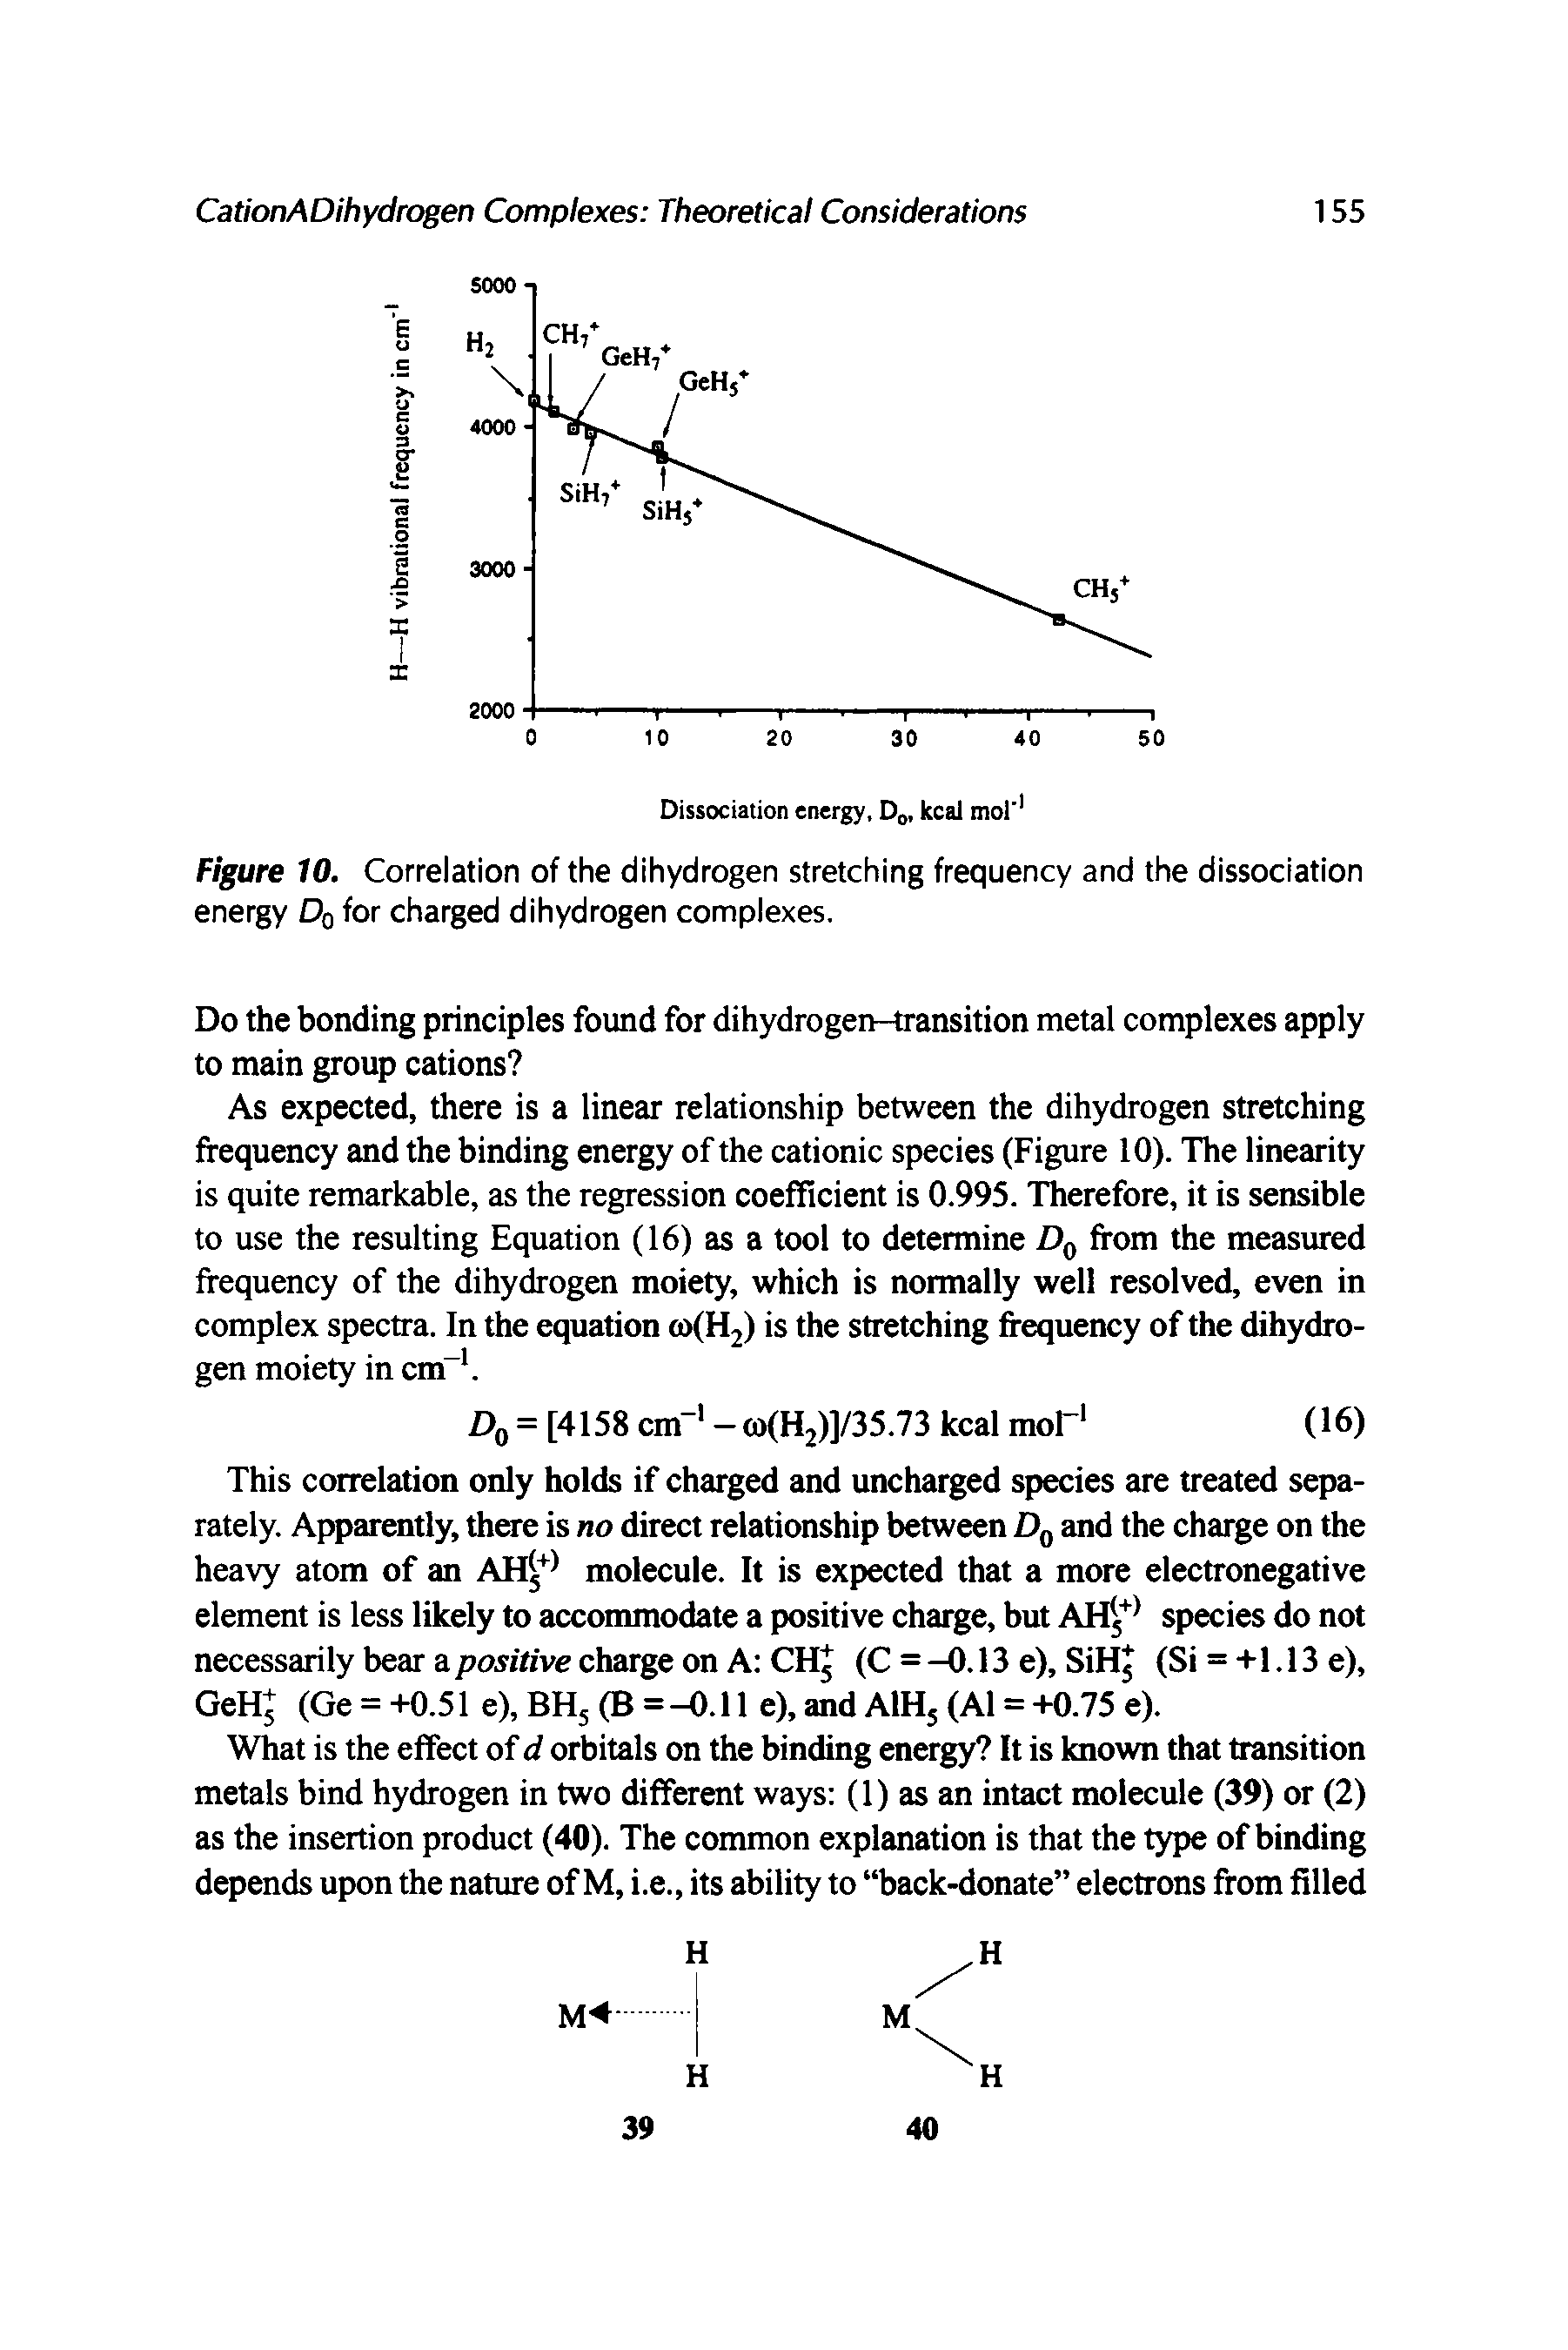 Figure 10. Correlation of the dihydrogen stretching frequency and the dissociation energy Dq for charged dihydrogen complexes.